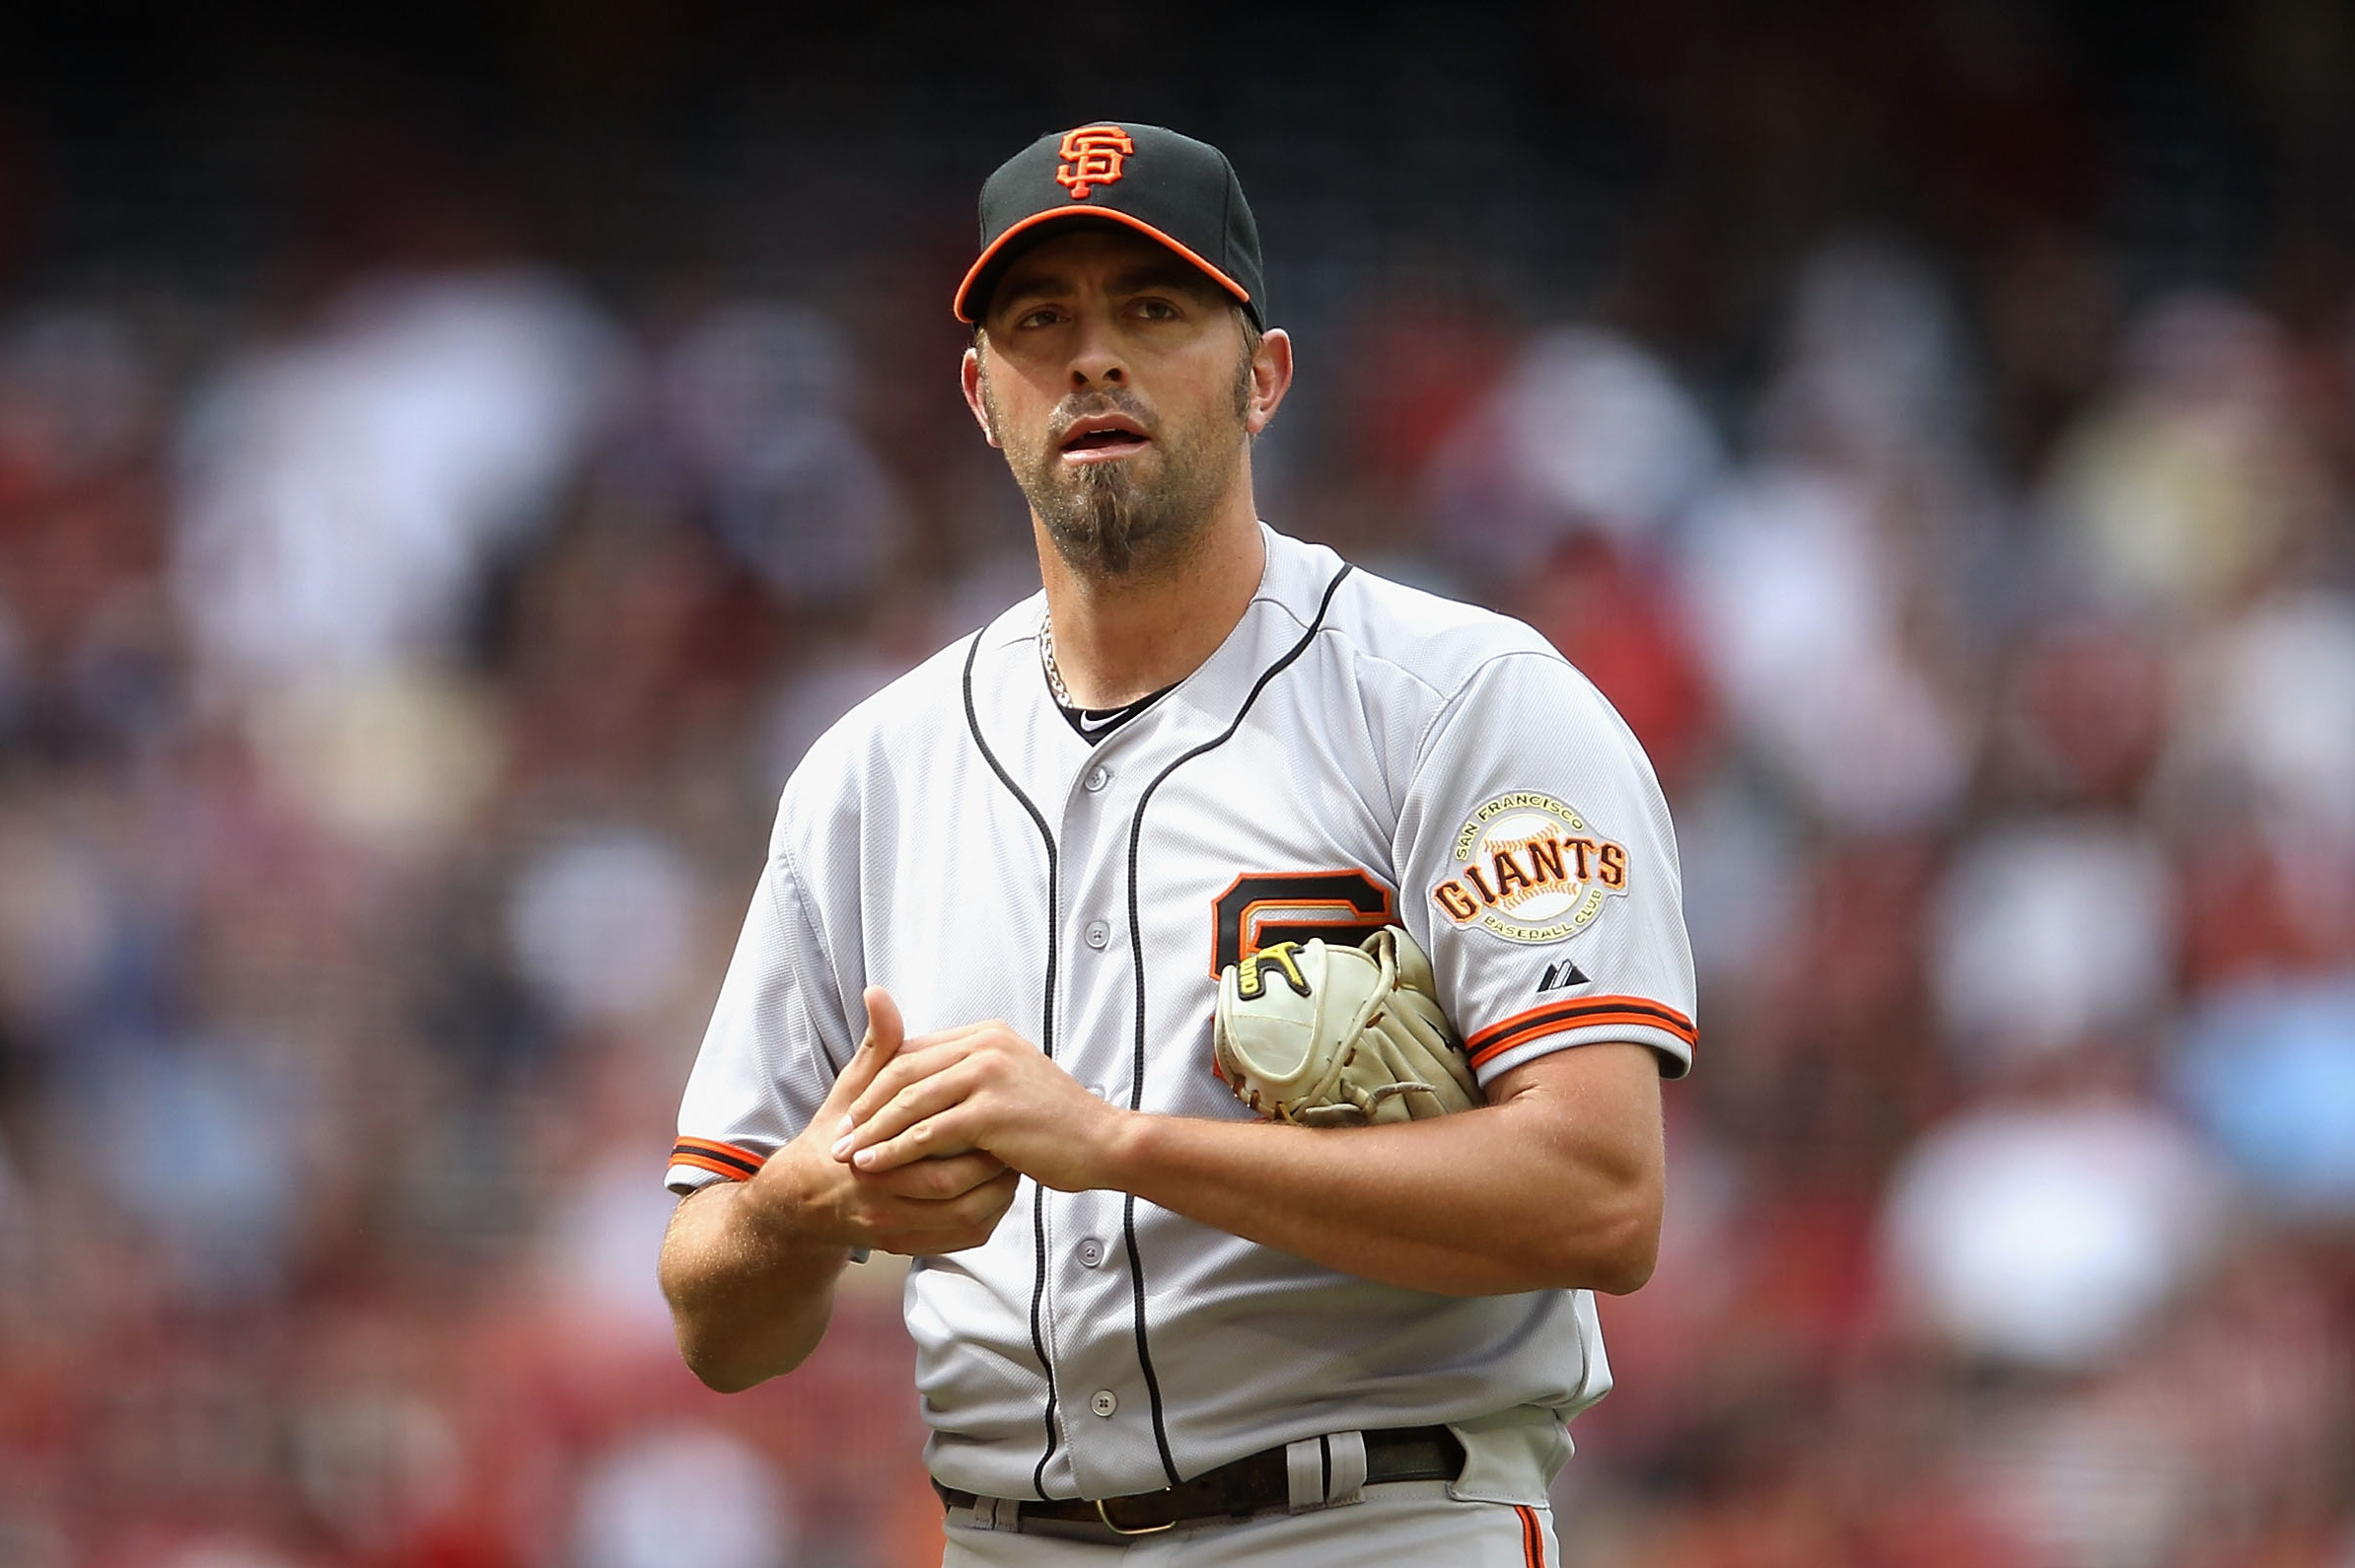 Tour of the Giants Clubhouse with Jeremy Affeldt 